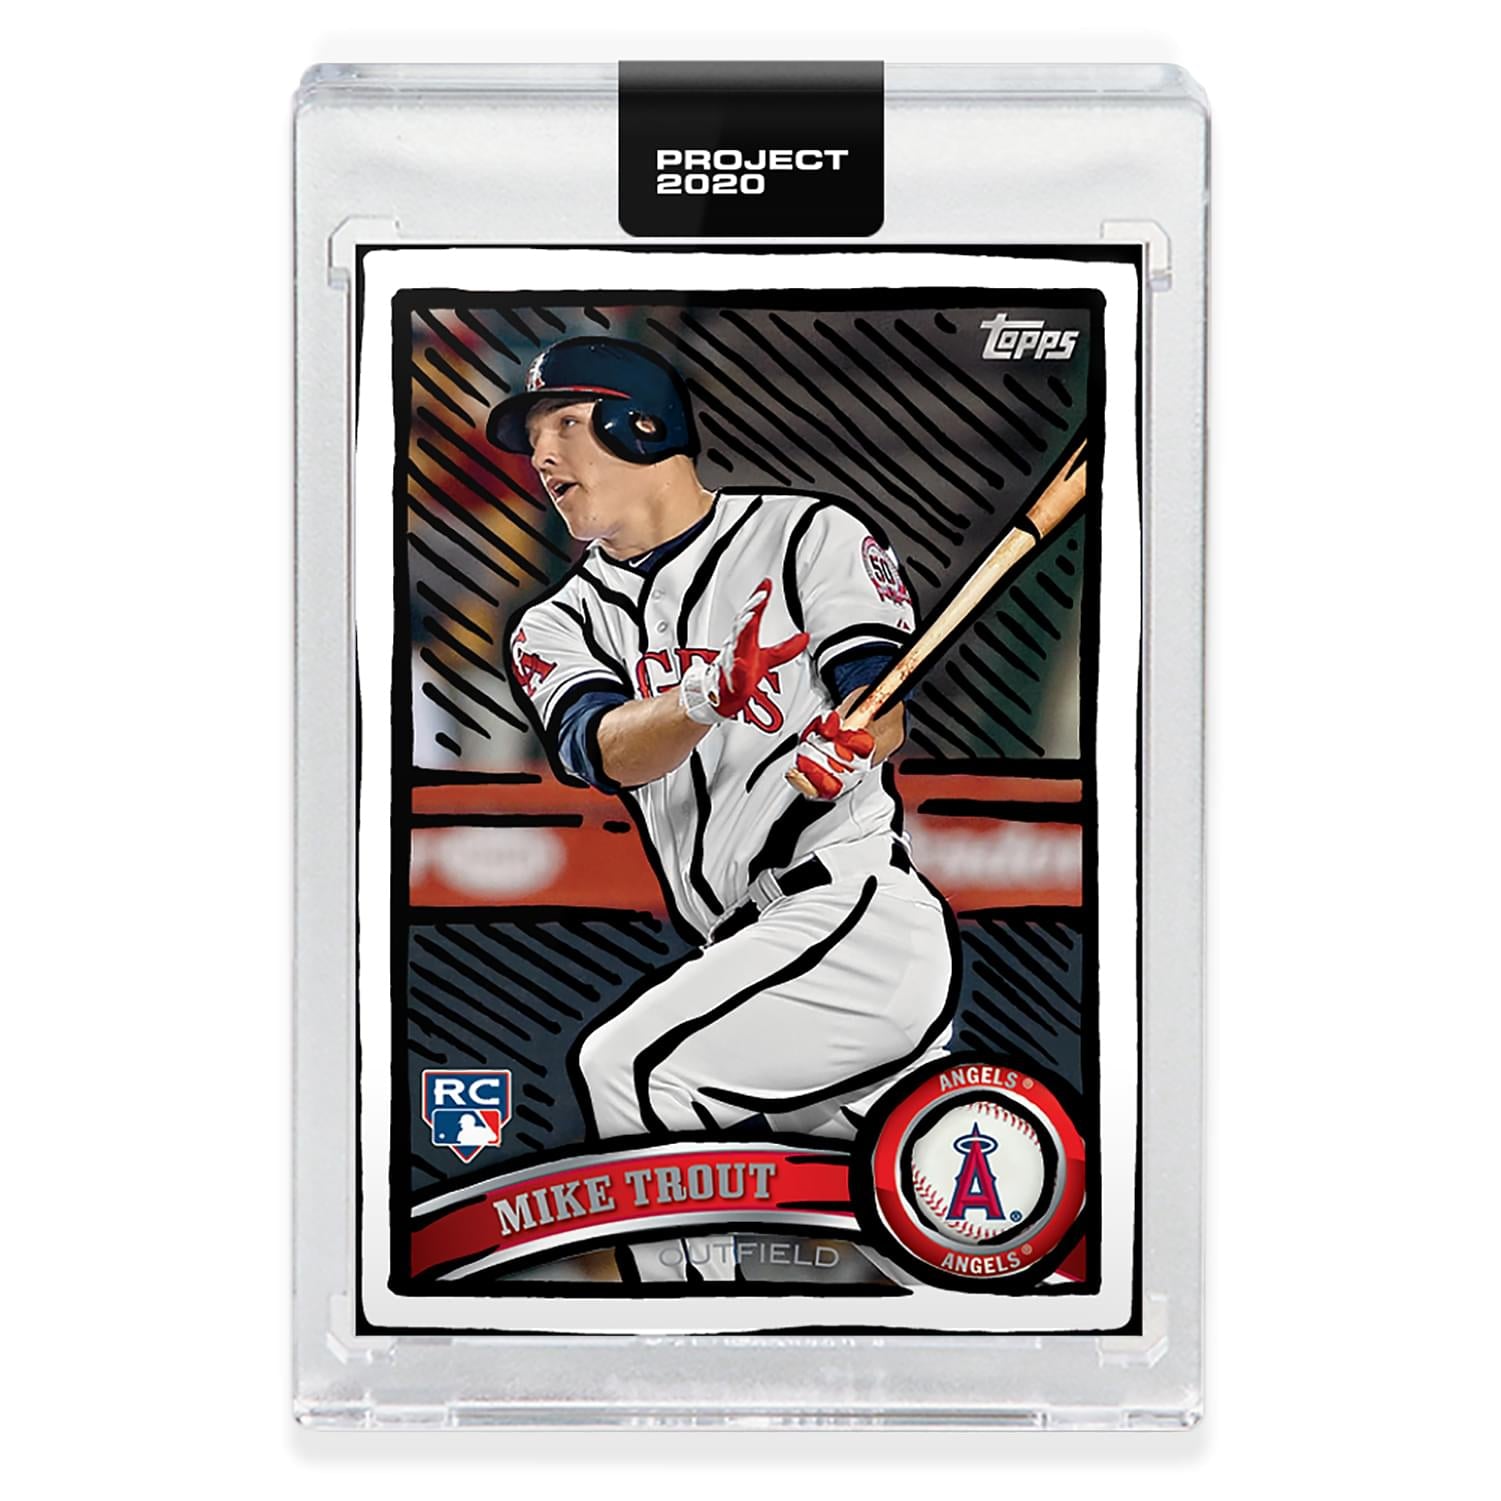 Topps PROJECT 2020 Card 207 - 2011 Mike Trout By Joshua Vides